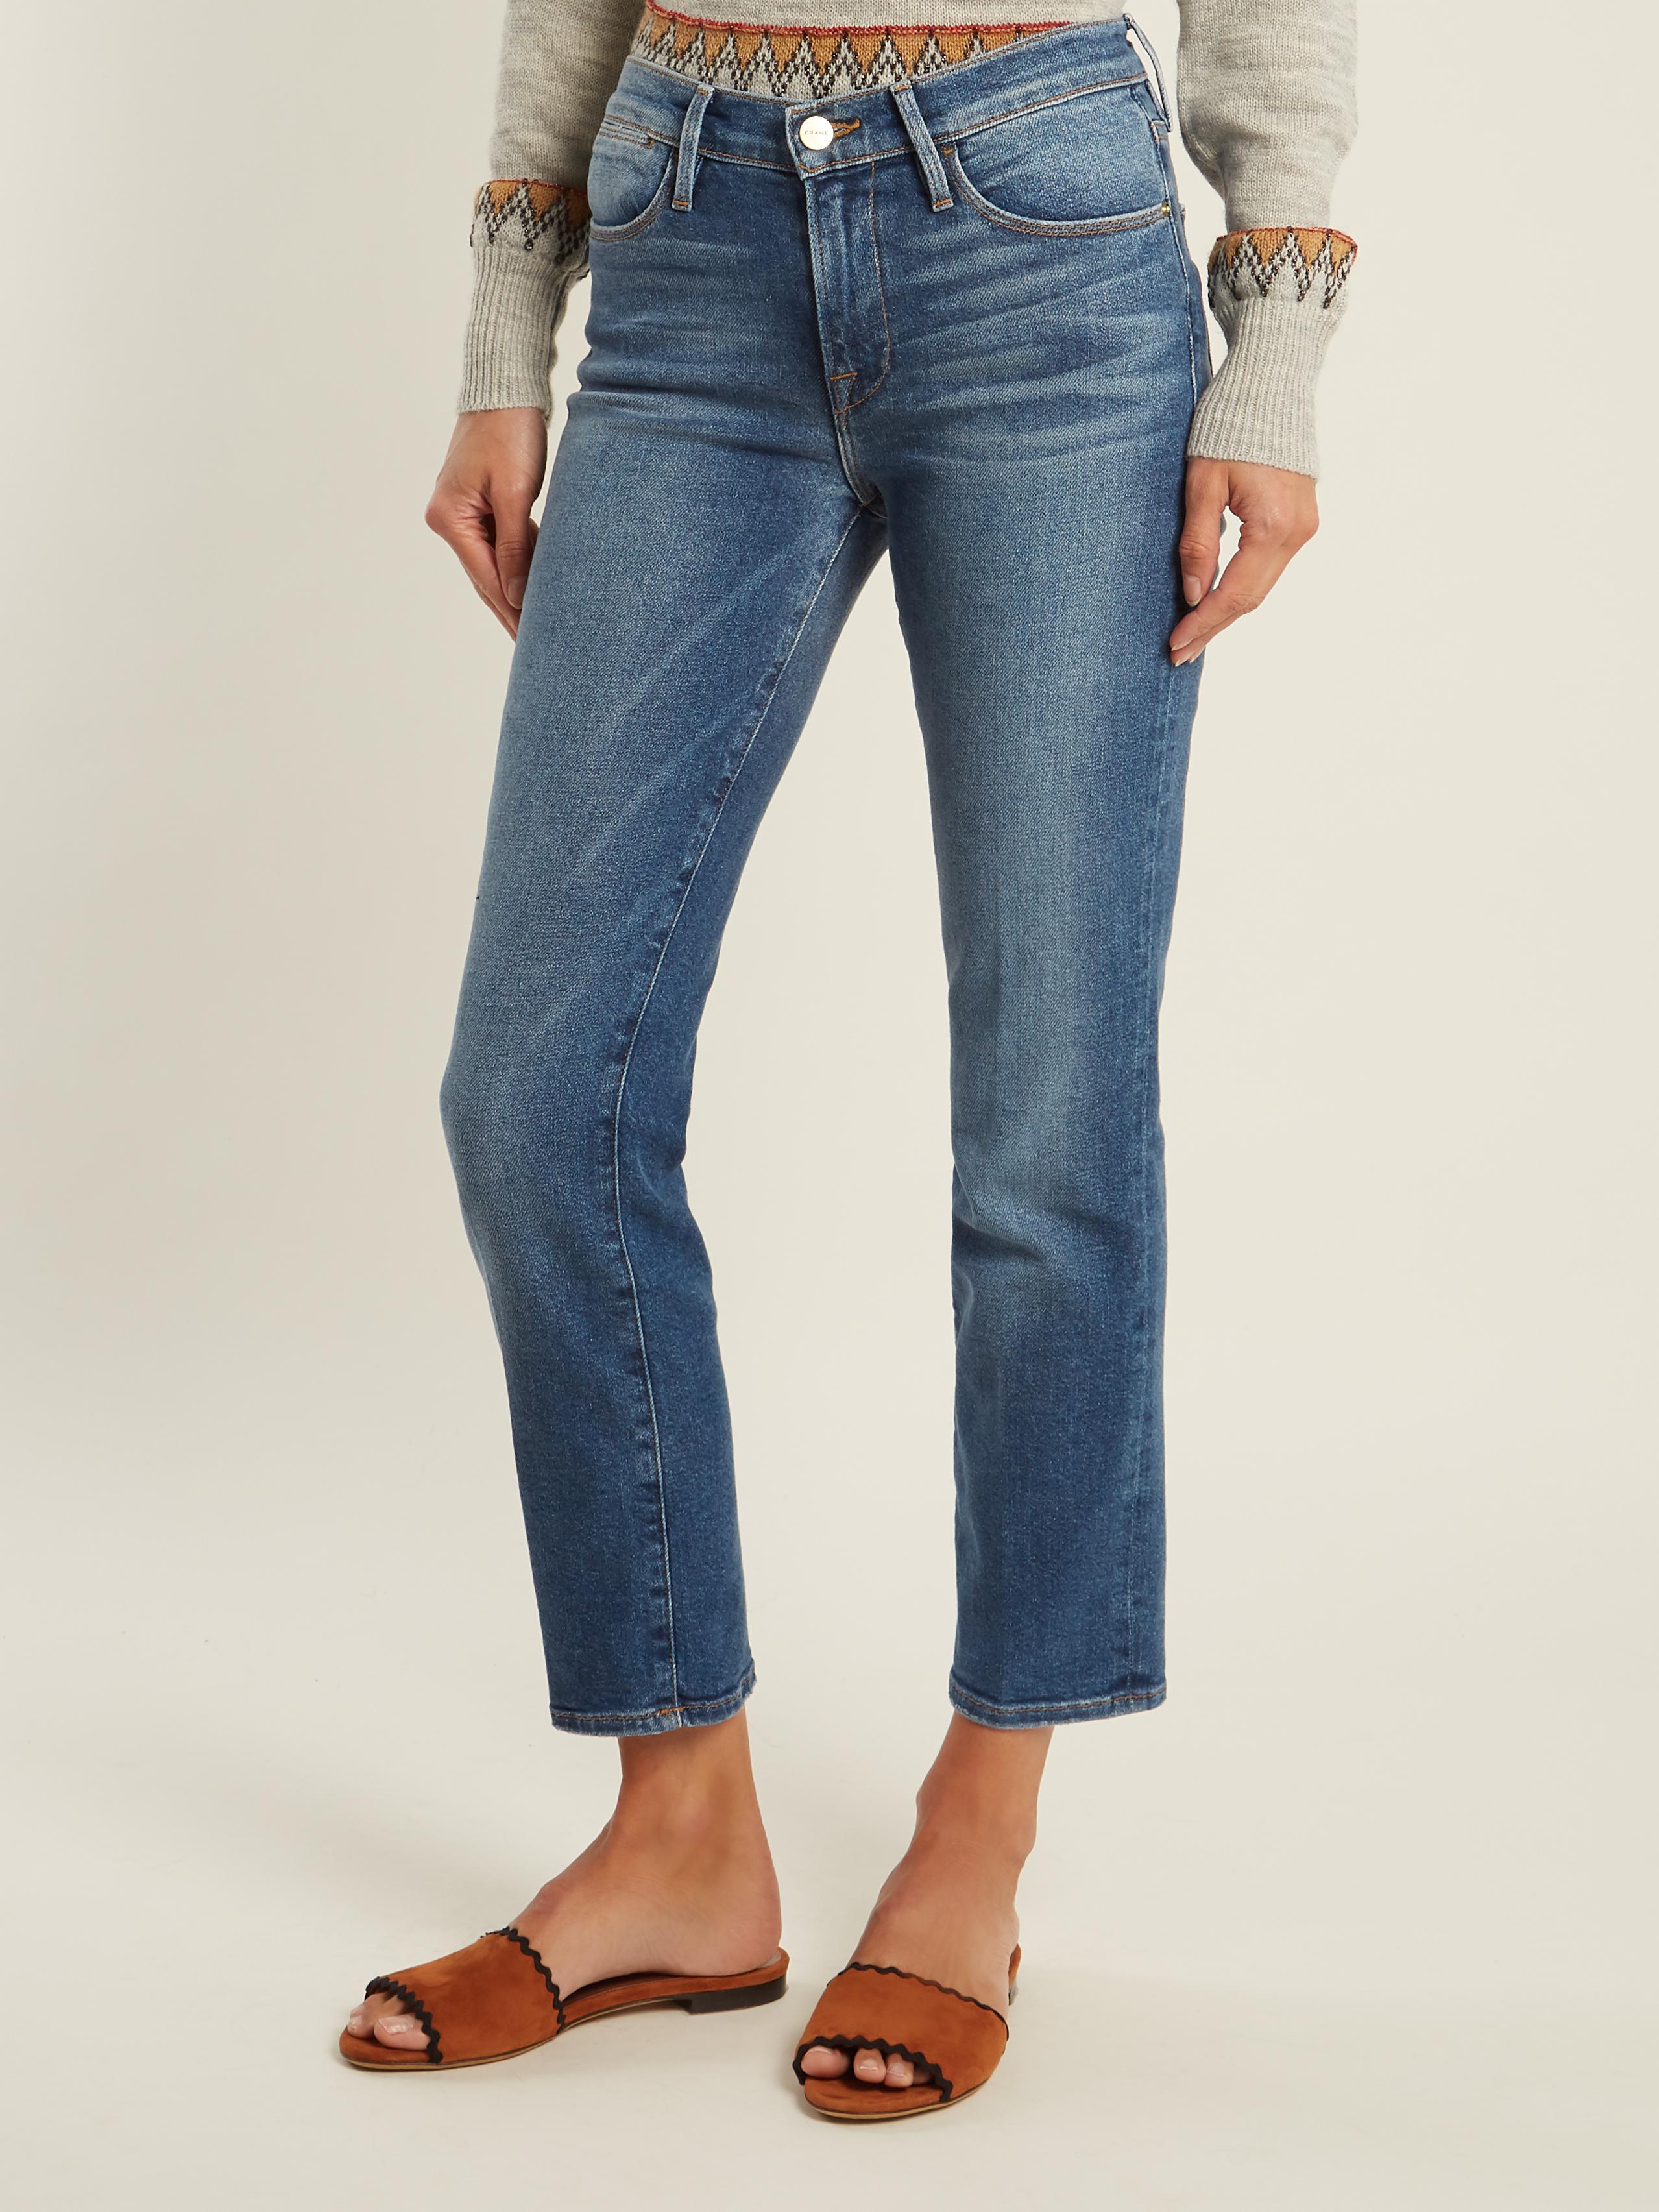 Lyst - Frame Le High Straight-leg Jeans in Blue